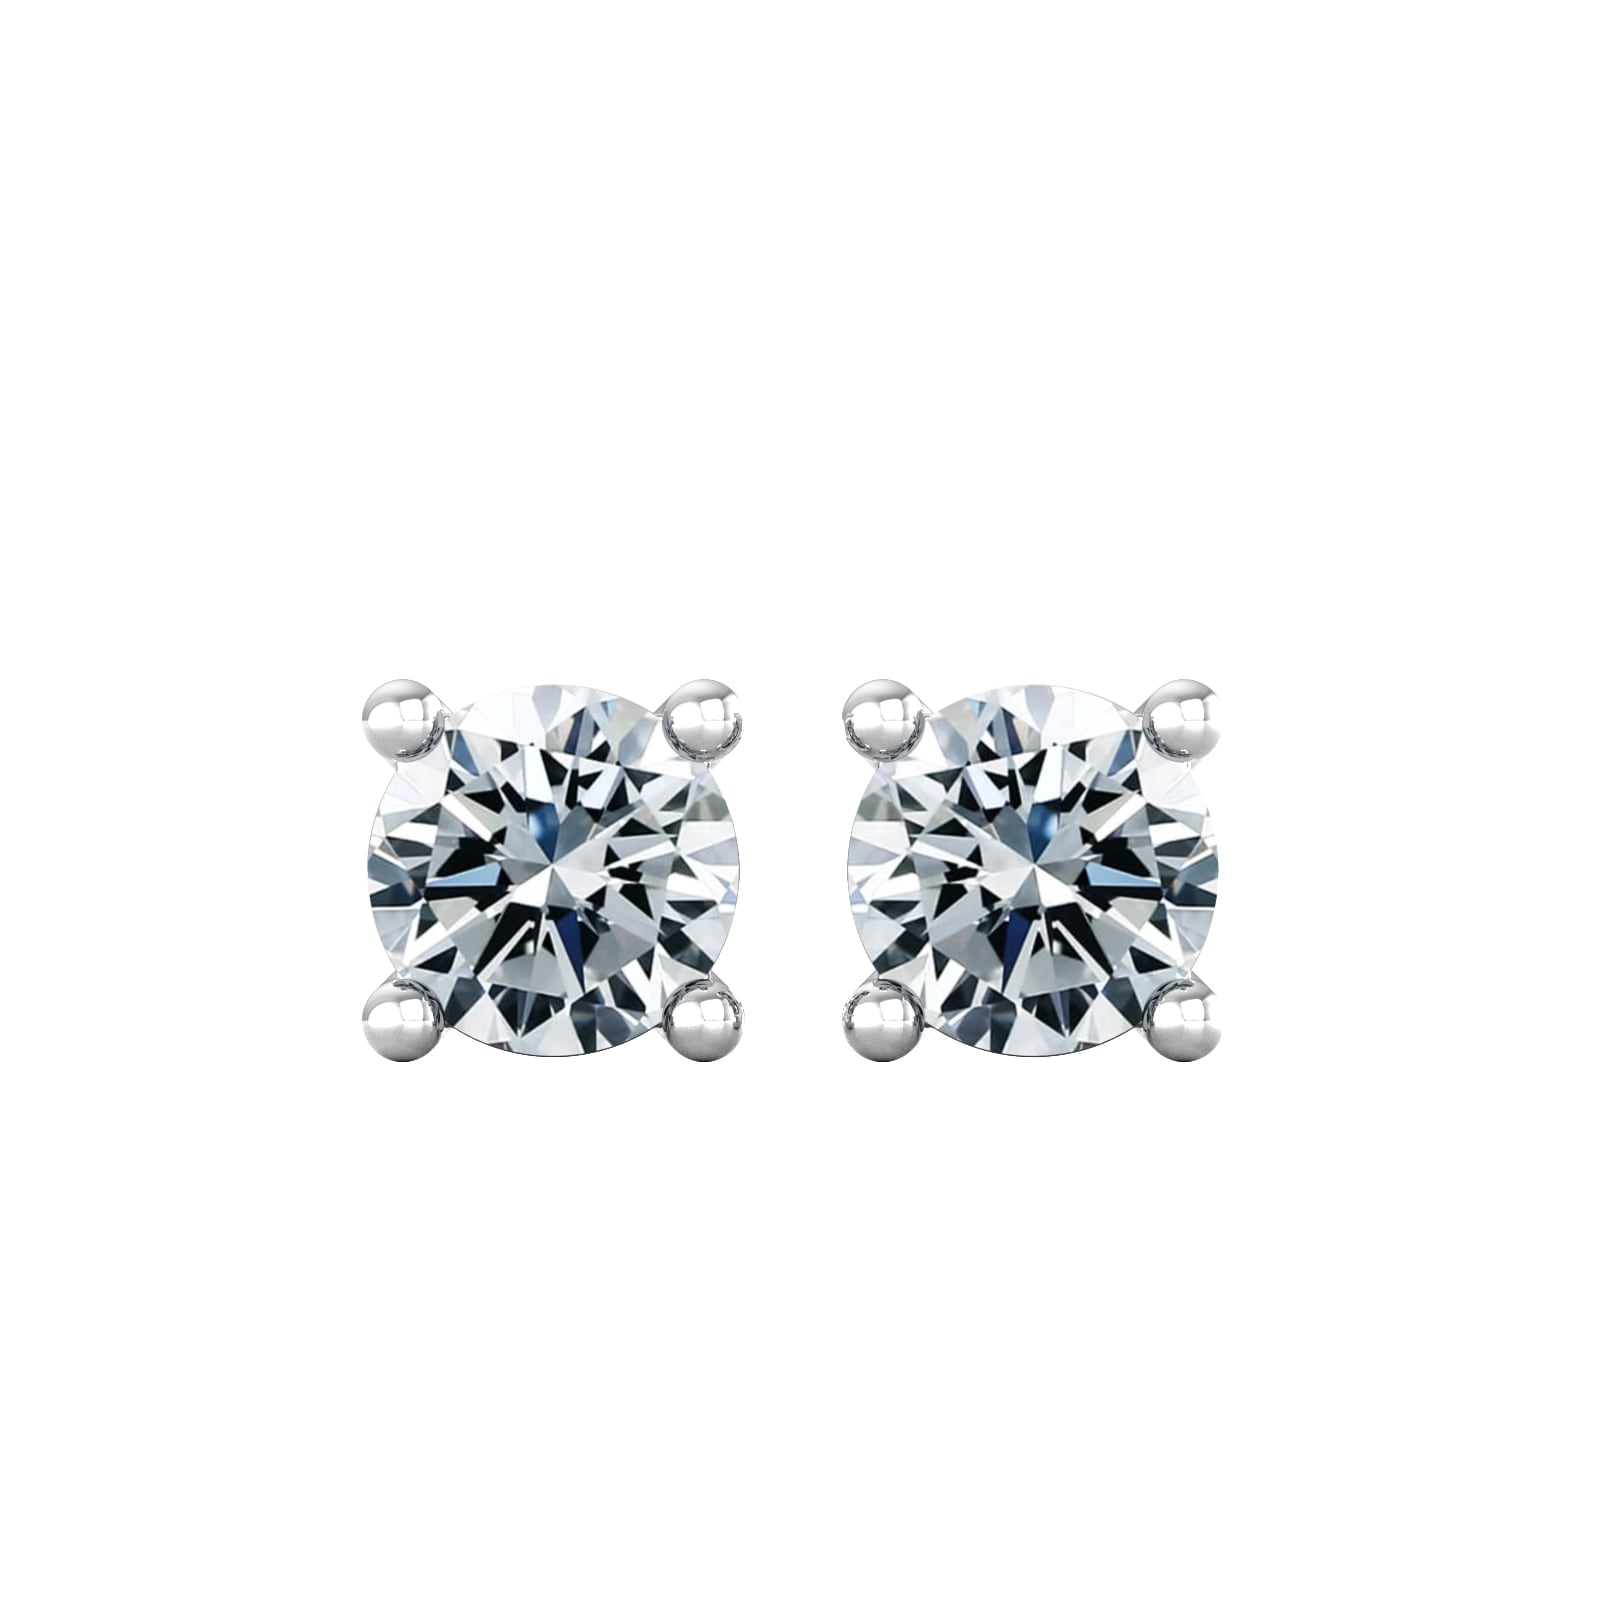 9ct White Gold 0.80cttw Solitaire Diamond Stud Earrings